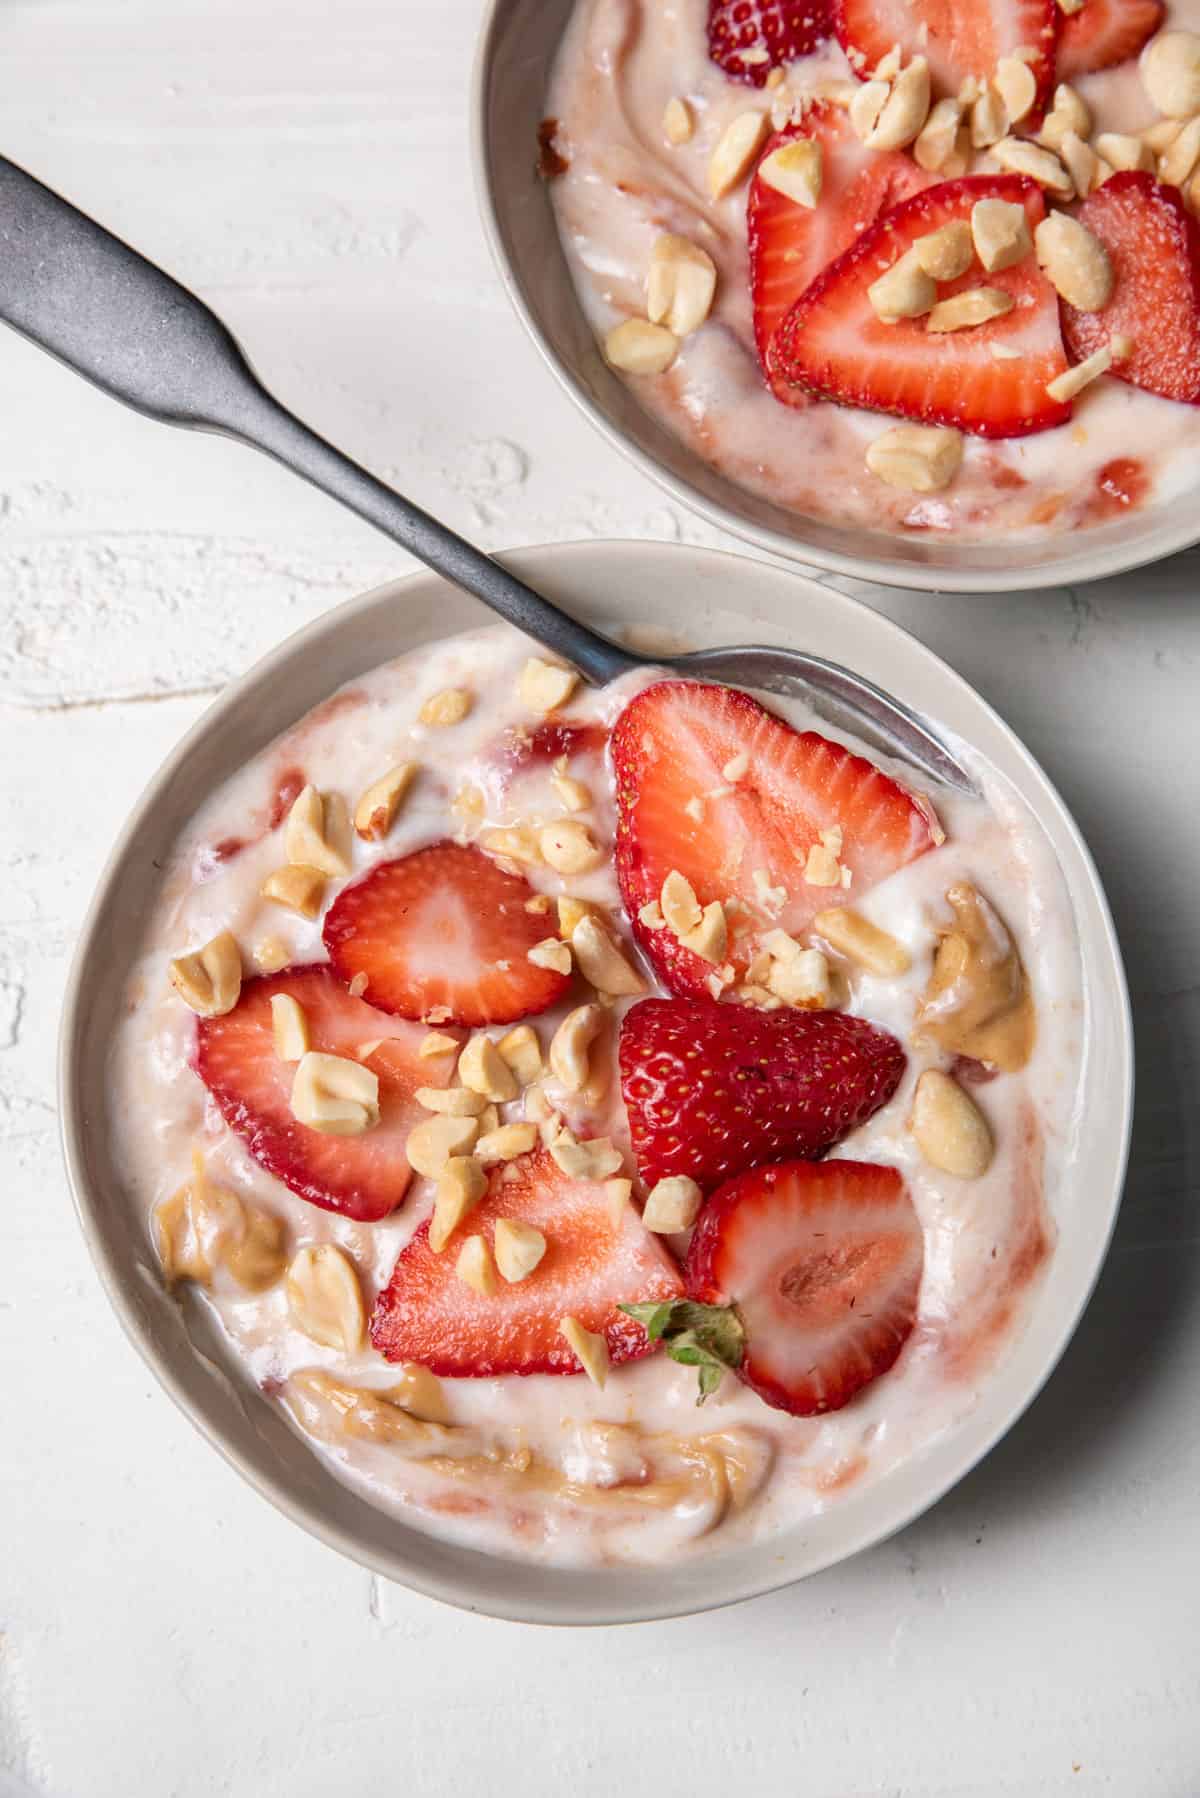 Peanut butter jelly yogurt in a bowl topped with strawberries and peanuts